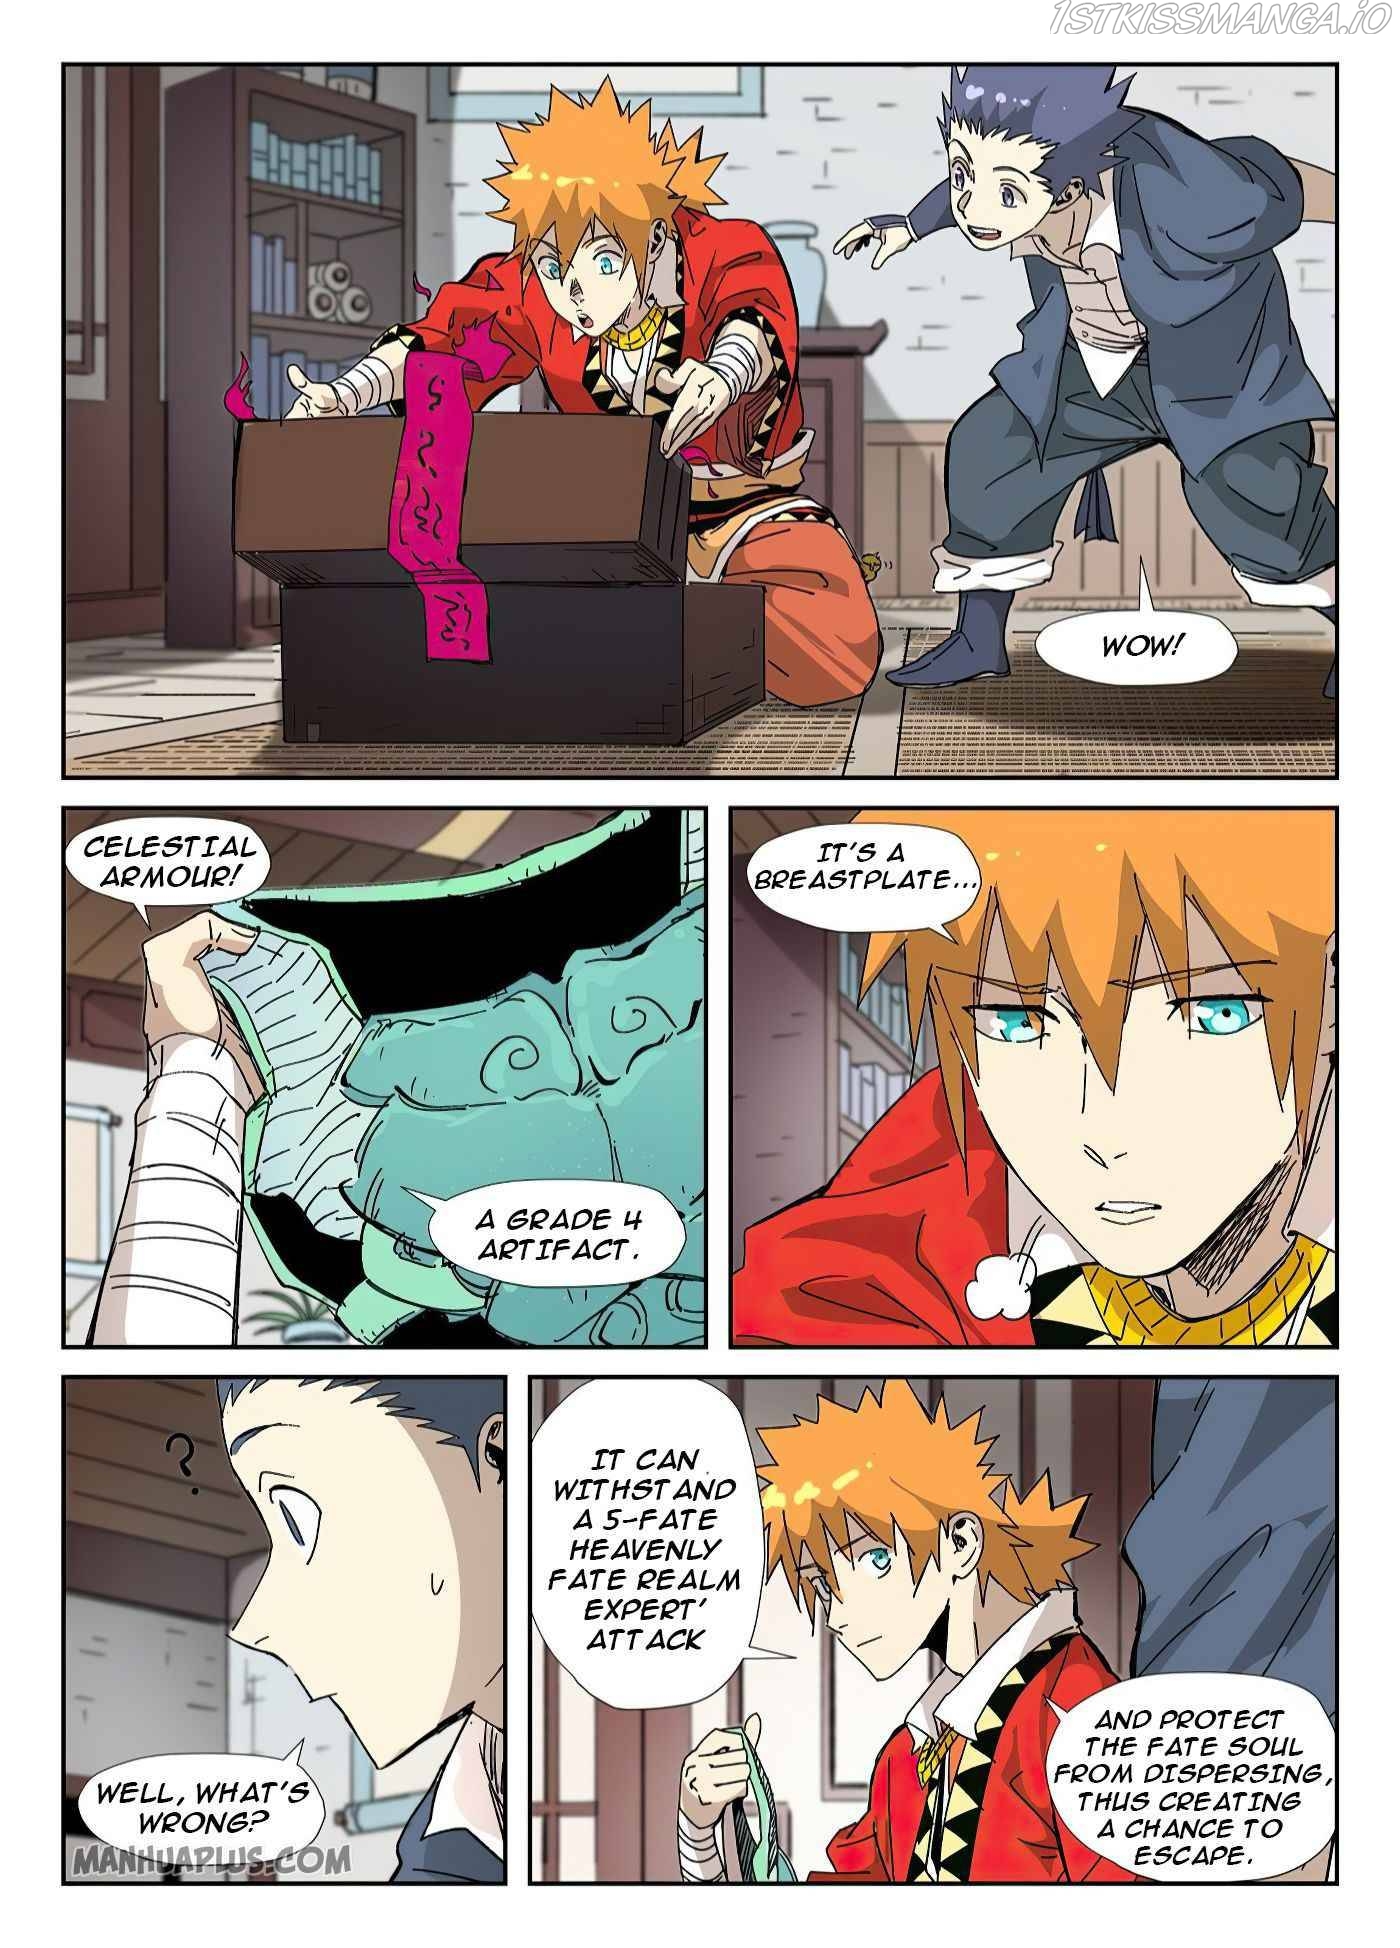 Tales of Demons and Gods Manhua Chapter 331.5 - Page 3